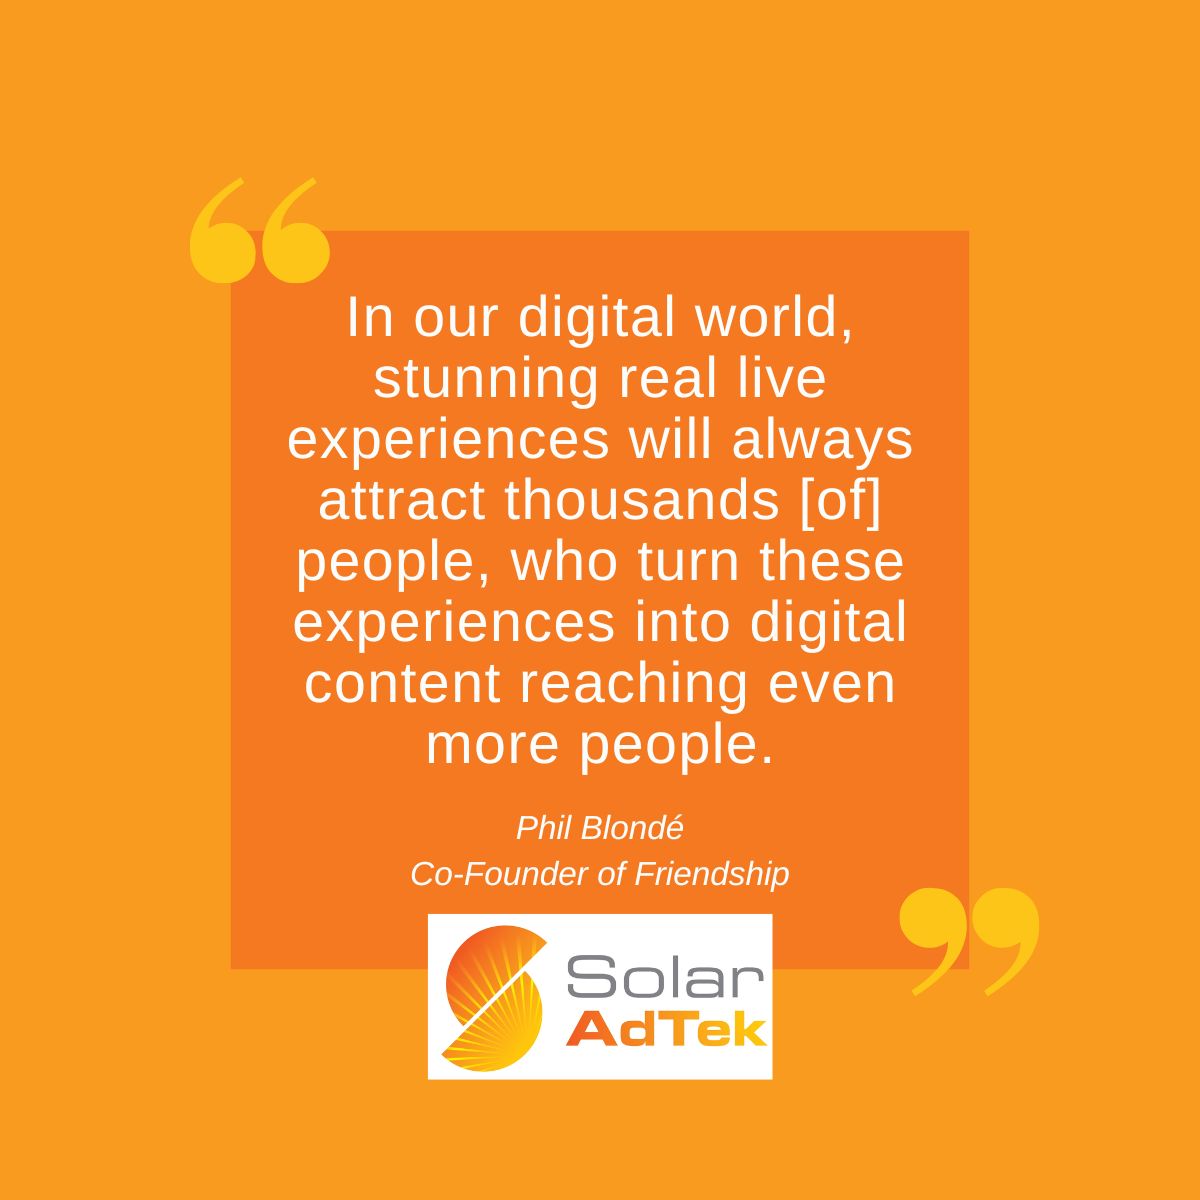 ☀ This quote is so very true and again shows how far OOH can reach thanks to digital. How many of us have either shared or seen shared an engaging OOH campaign on our social channels?

#solaradtek #solarlighting #lightingspecialists #advertisinglighting #bushelterlighting